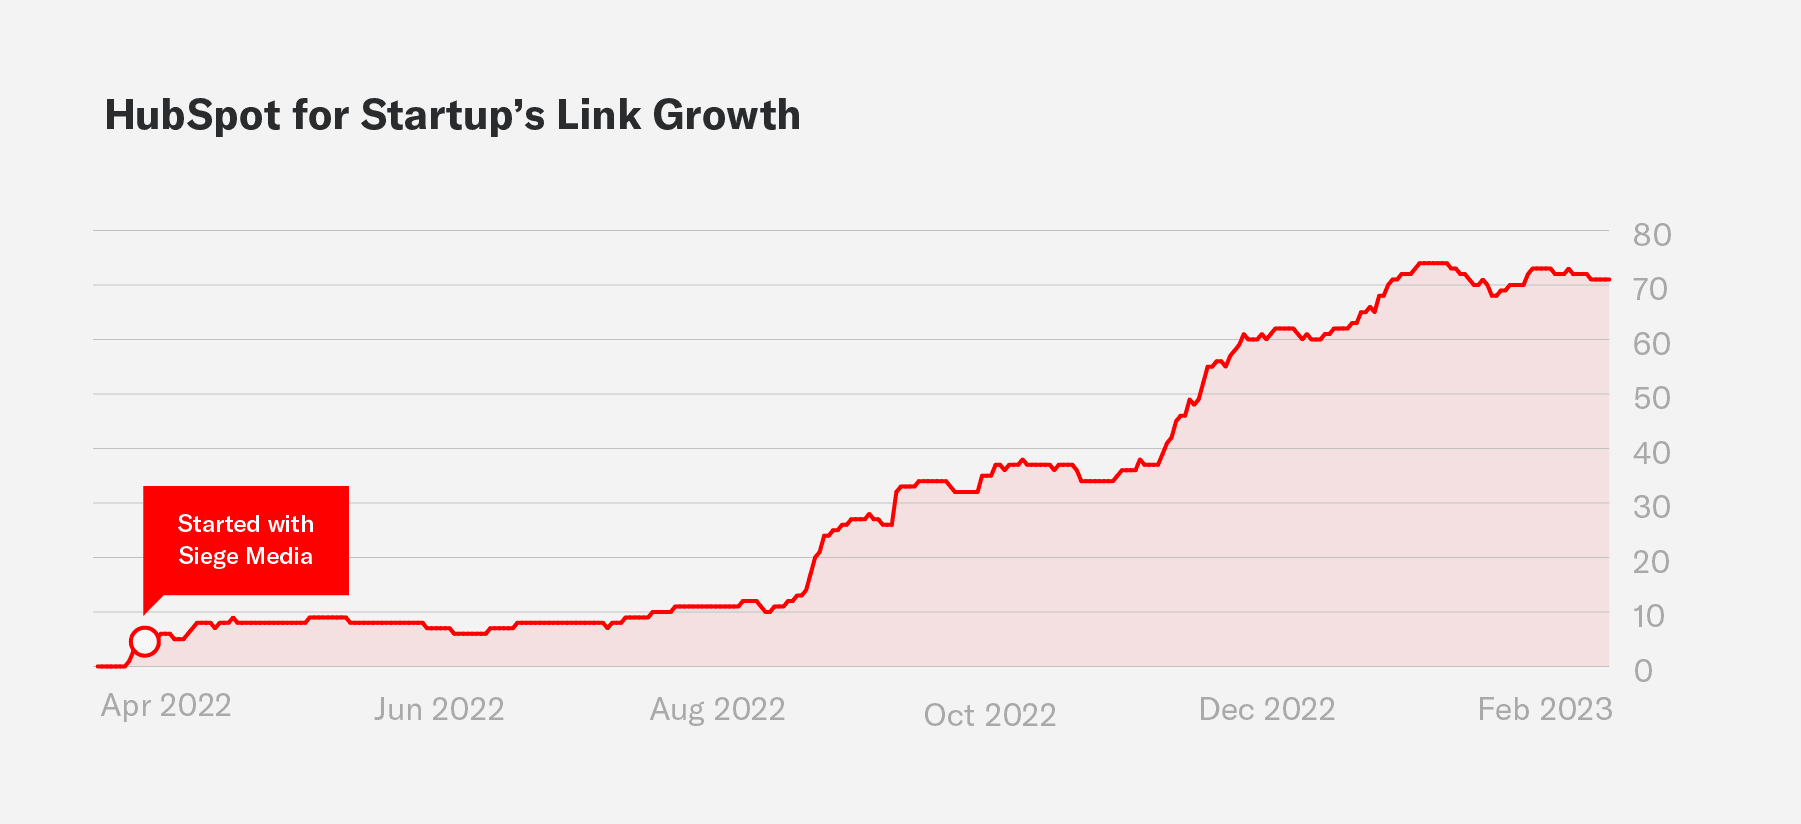 A graph that represents how Siege Media increased link growth for HubSpot